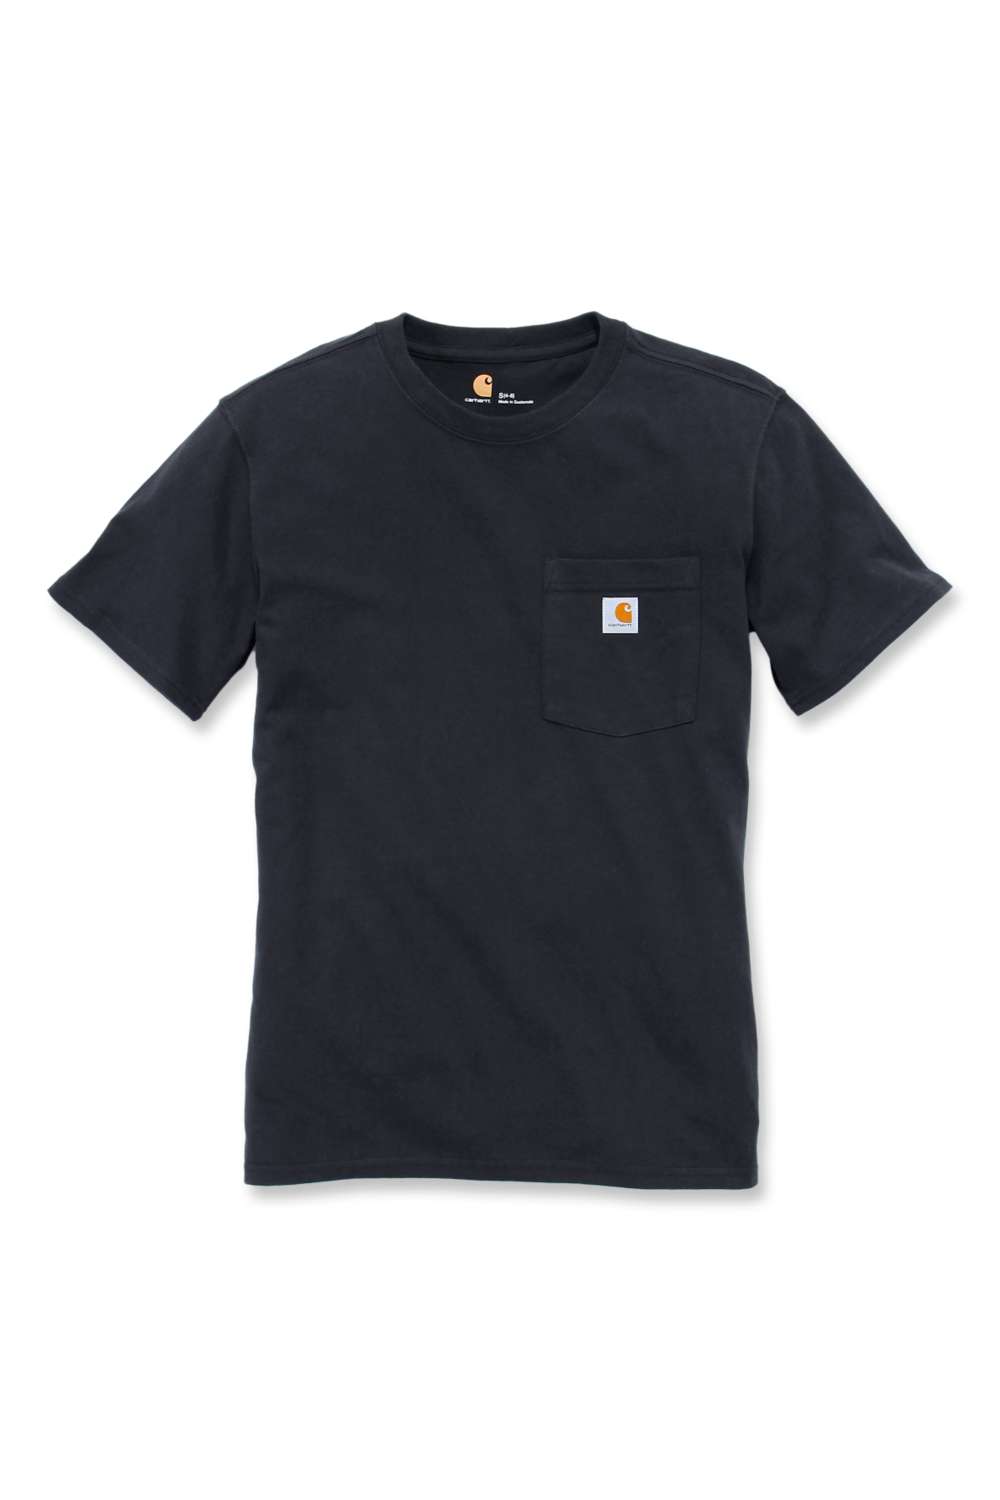 WORKW_POCKET_S_S_T-SHIRT_1RgZcbUUYz